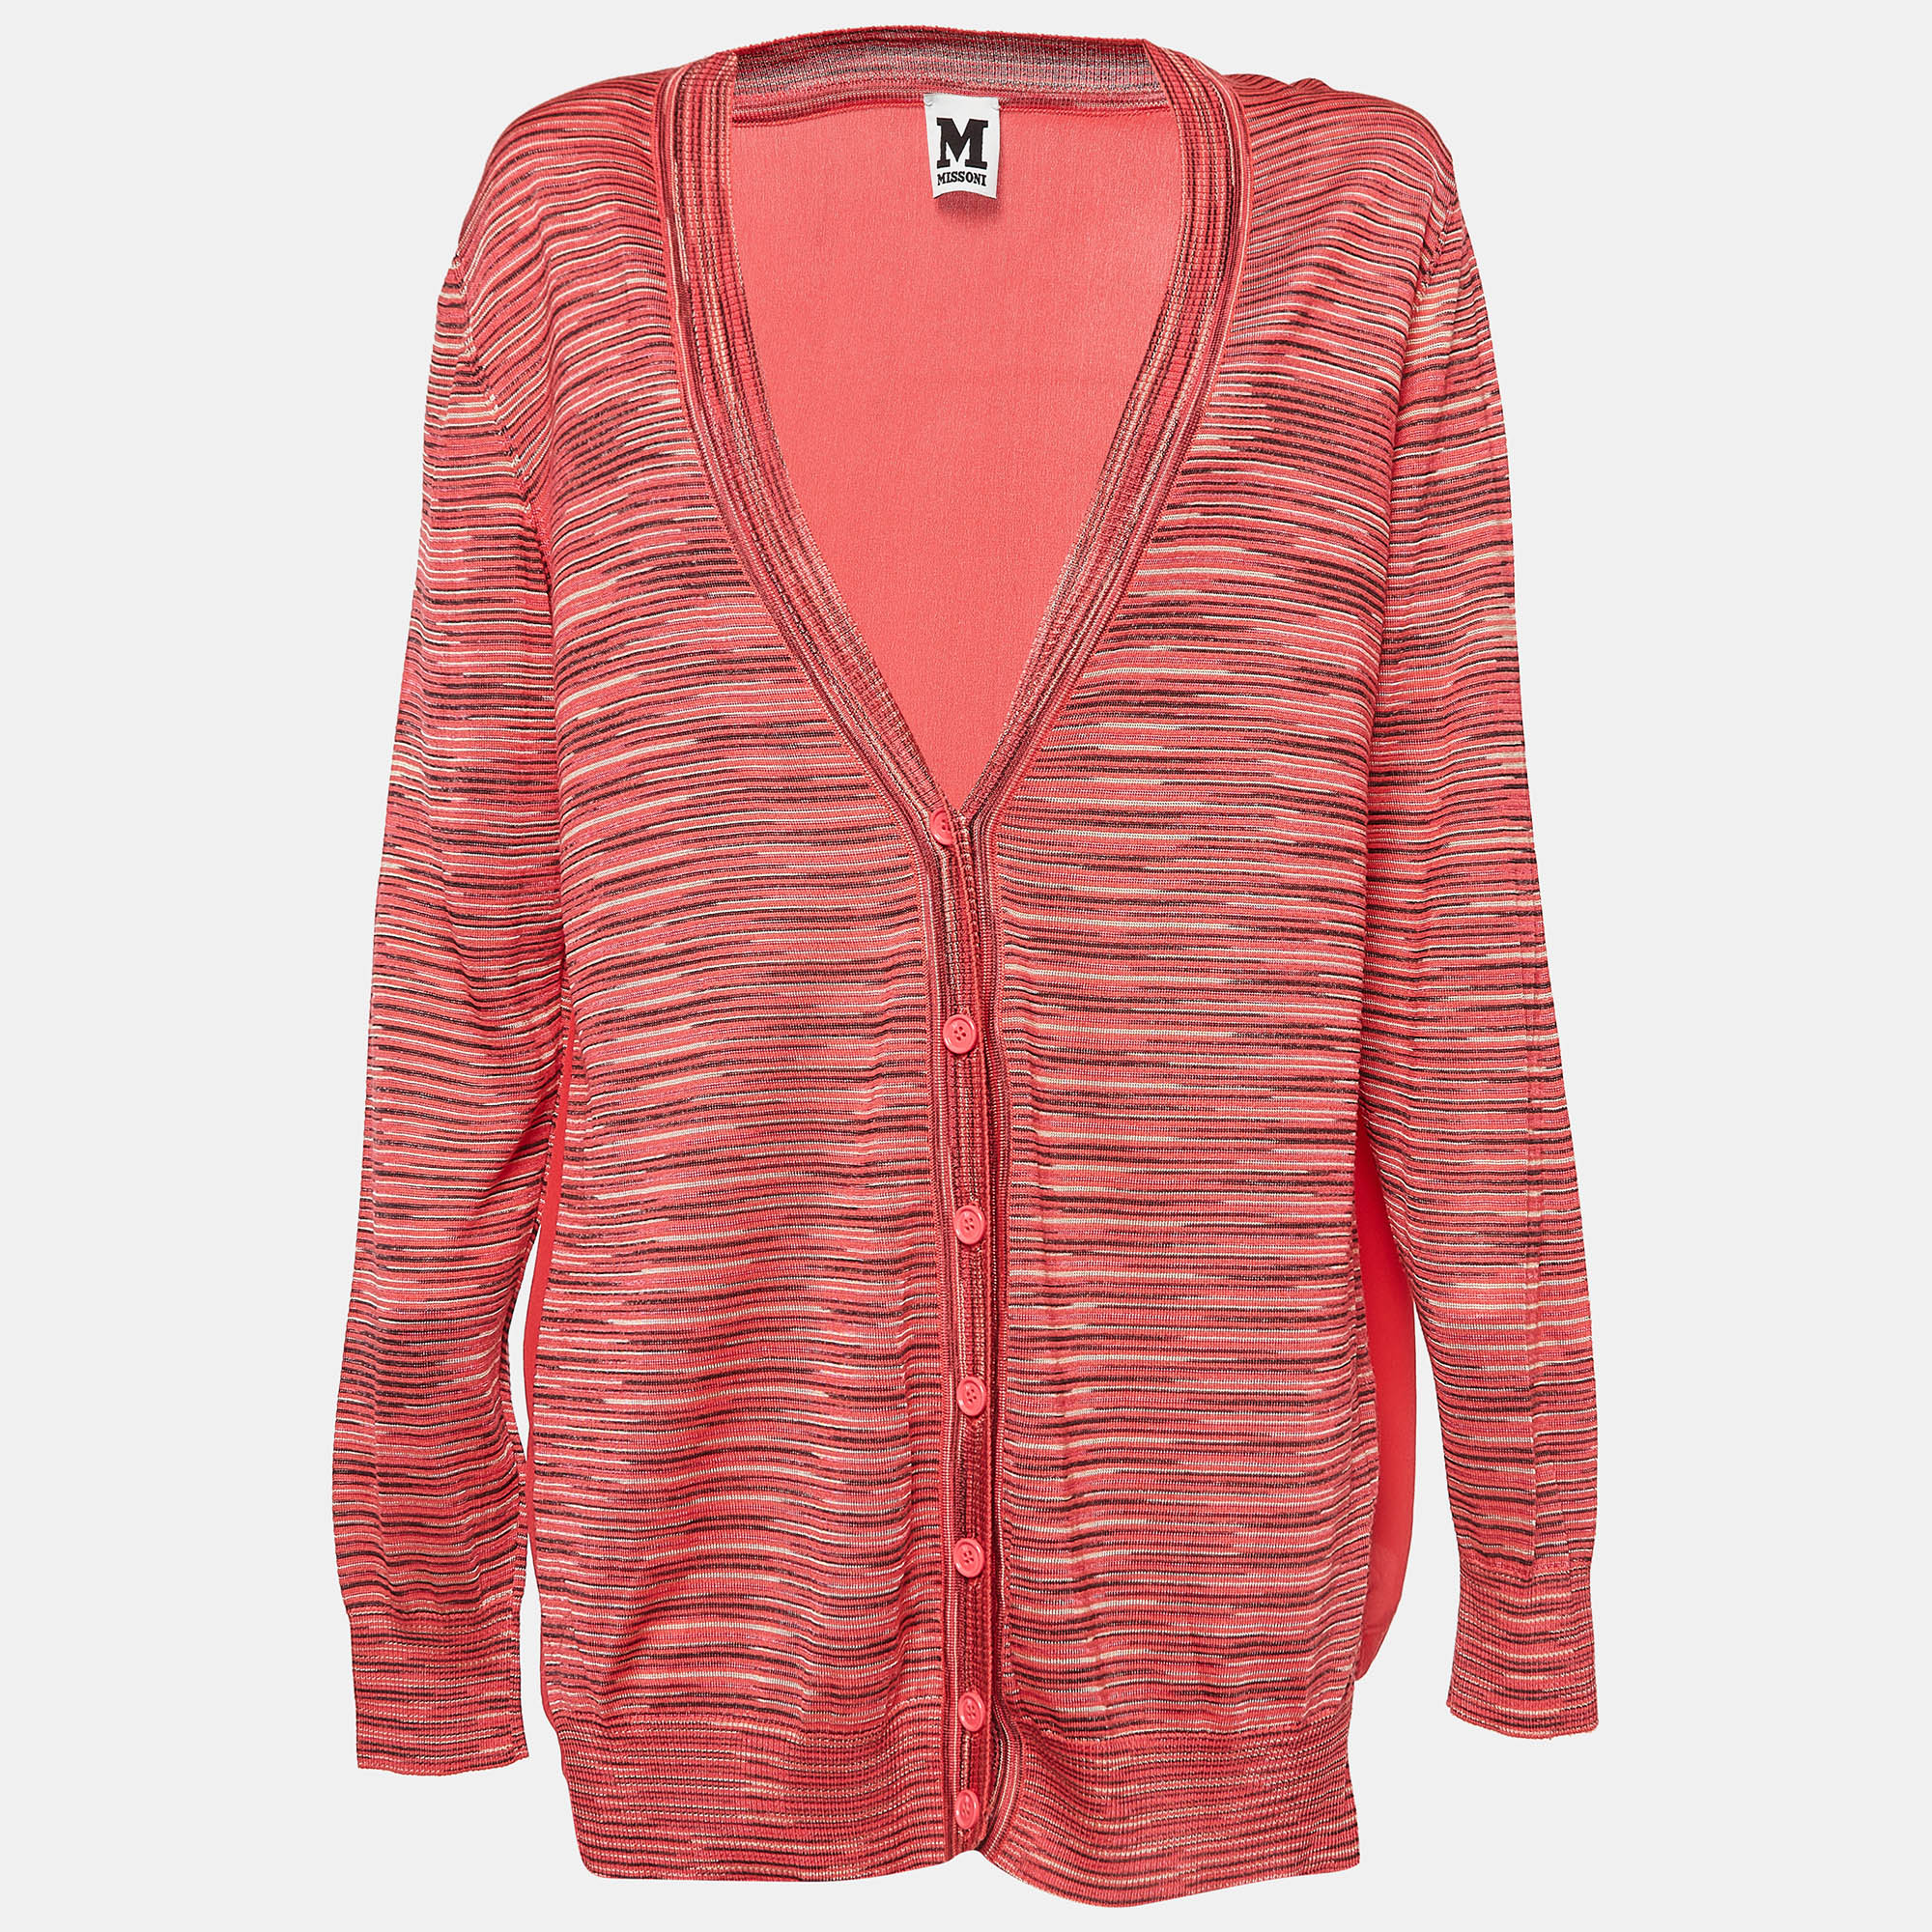 

Missoni Pink Patterned Knit Button Front Cardigan